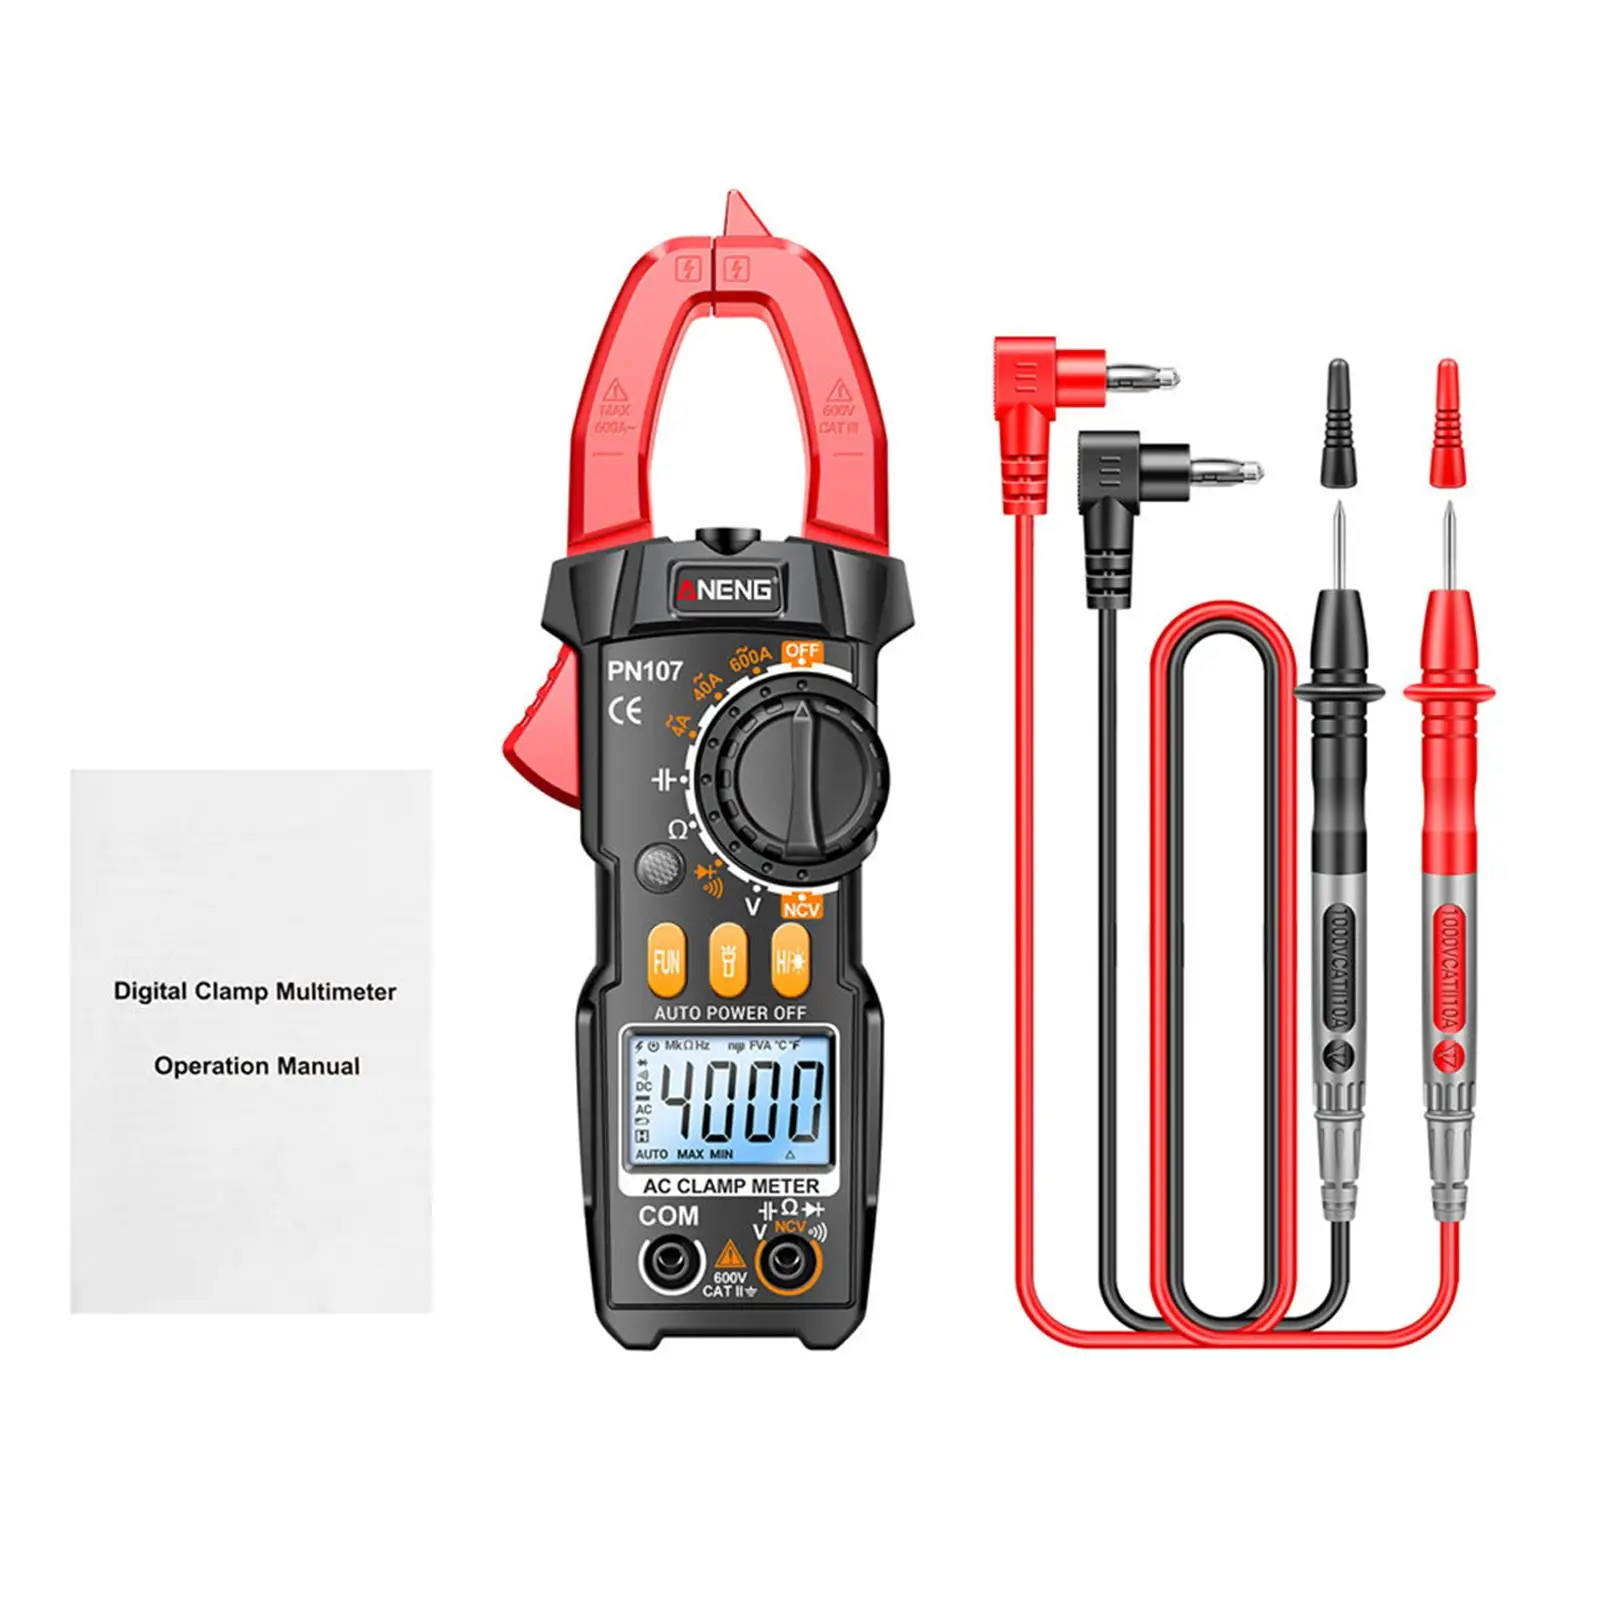 Digital Clamp Meter Portable Tool for Automotive Troubleshooting Batteries